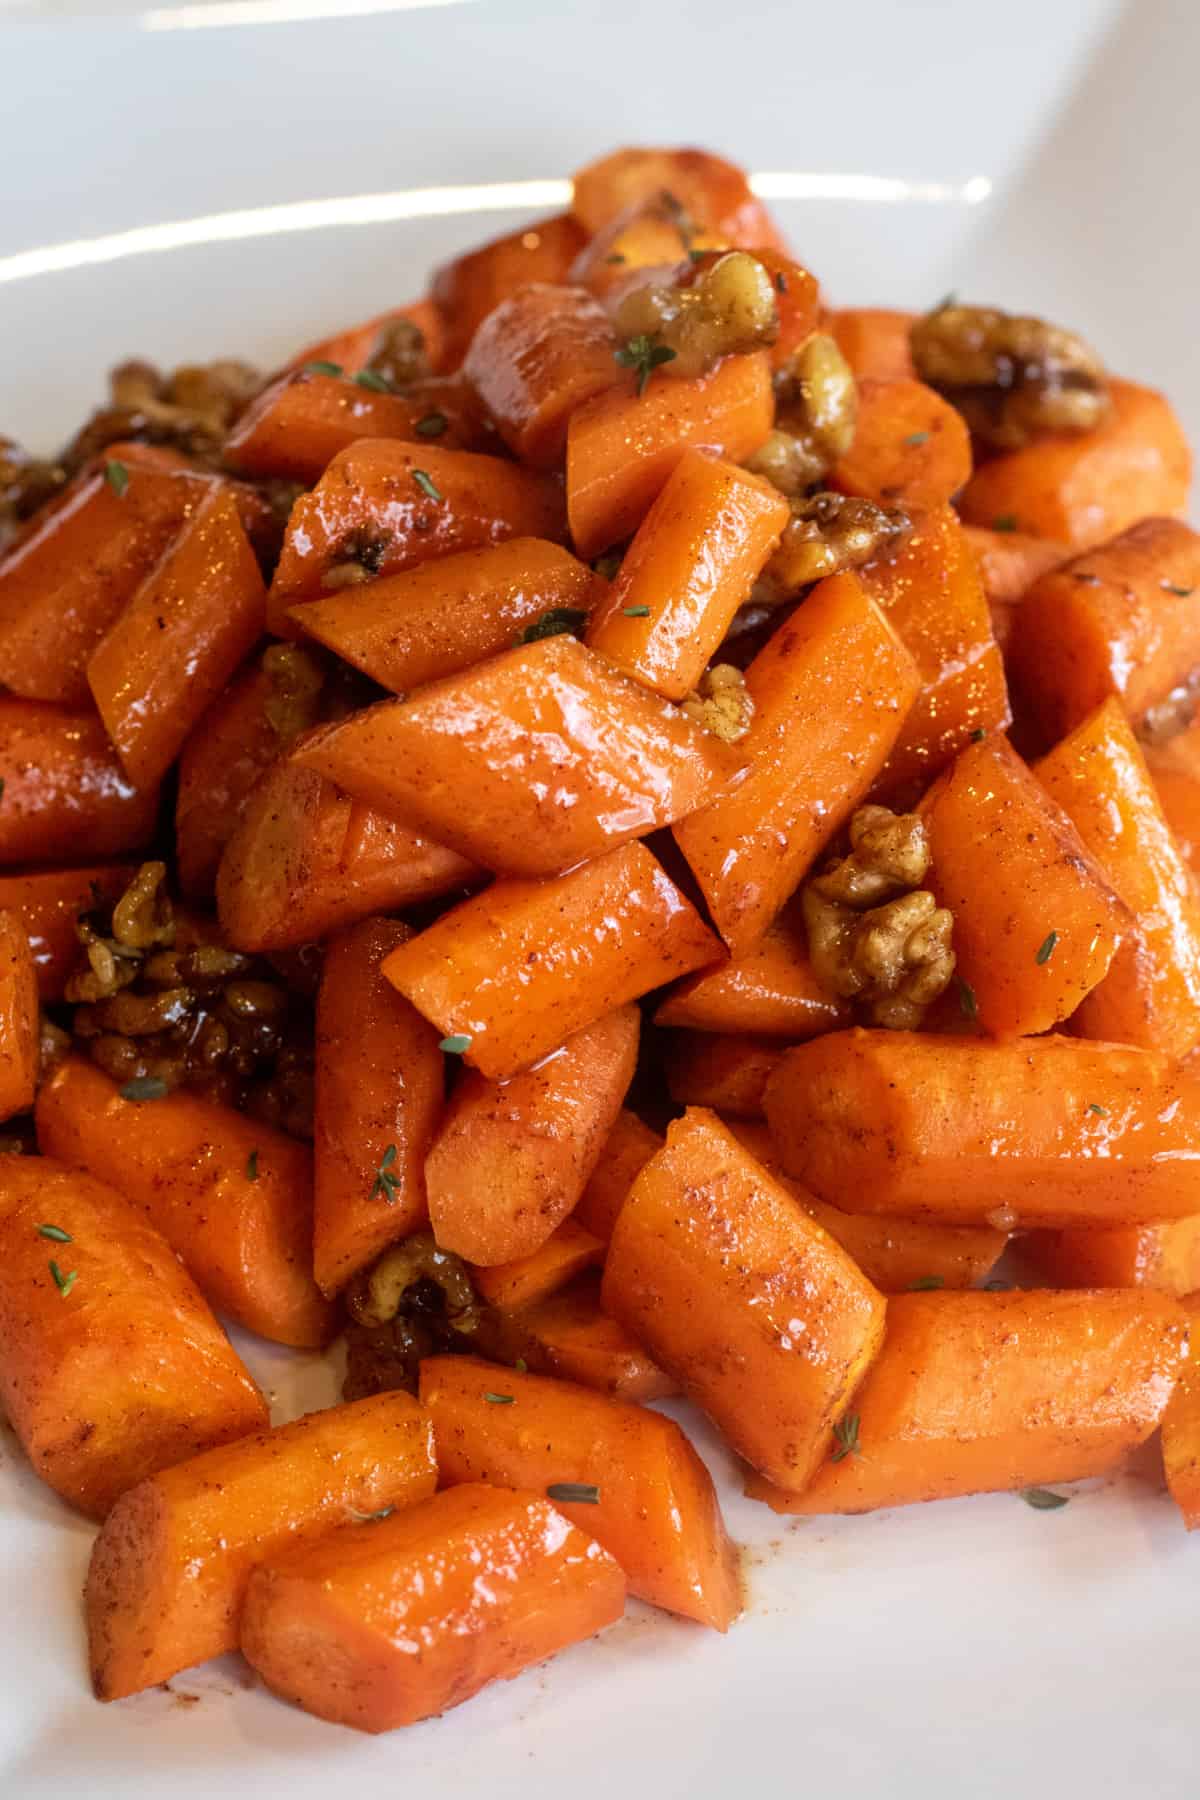 a plate of glazed carrots with walnuts.